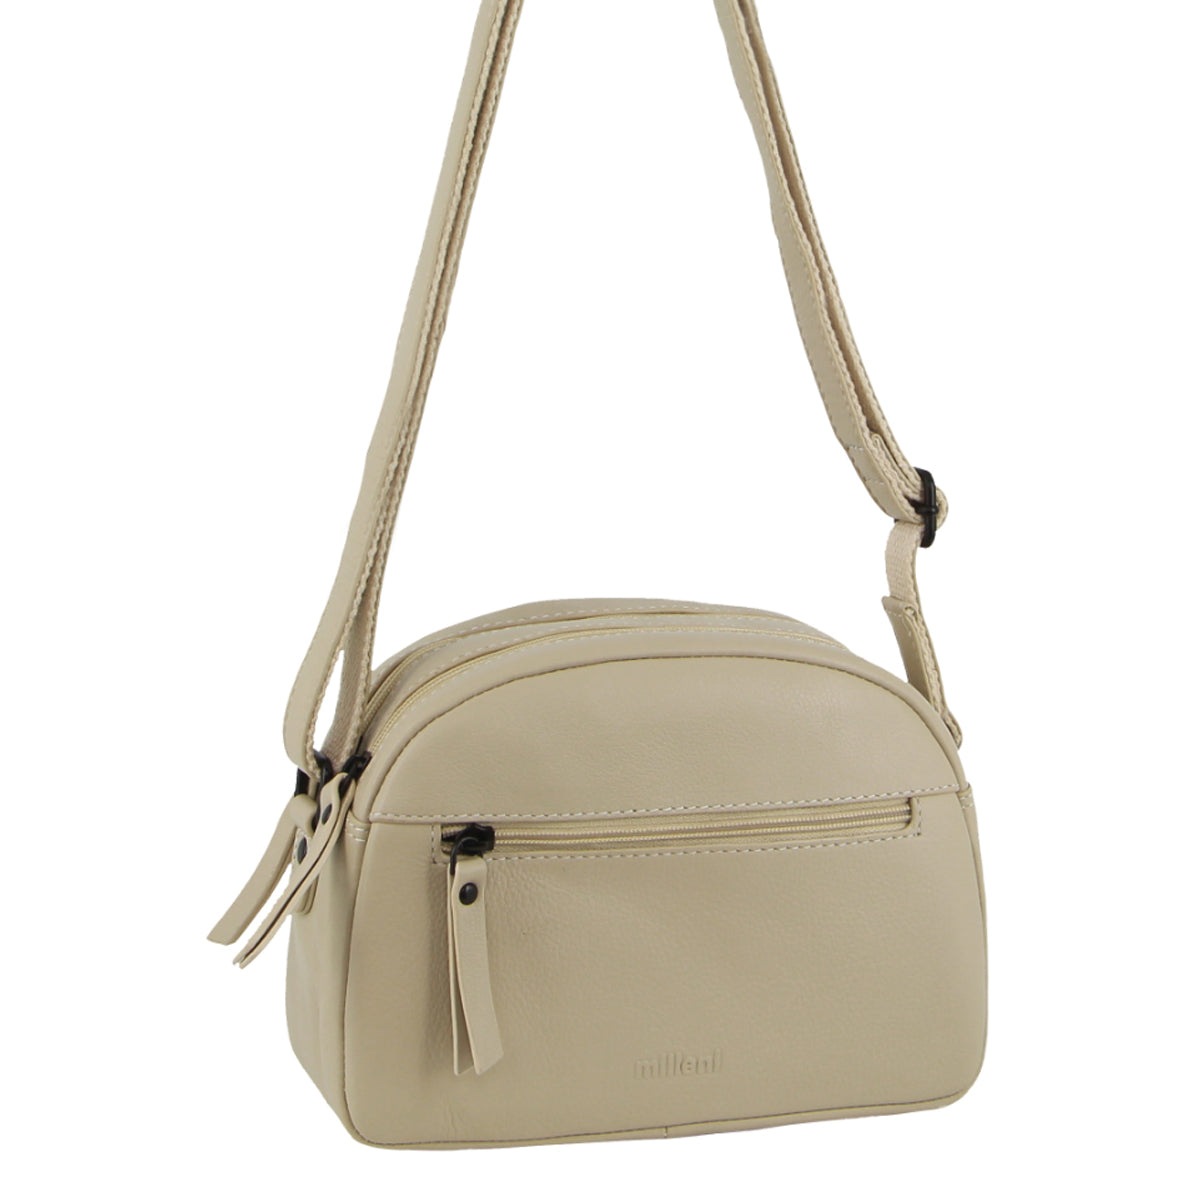 Milleni - NL3869 Small rounded leather sidebag - Cement-3